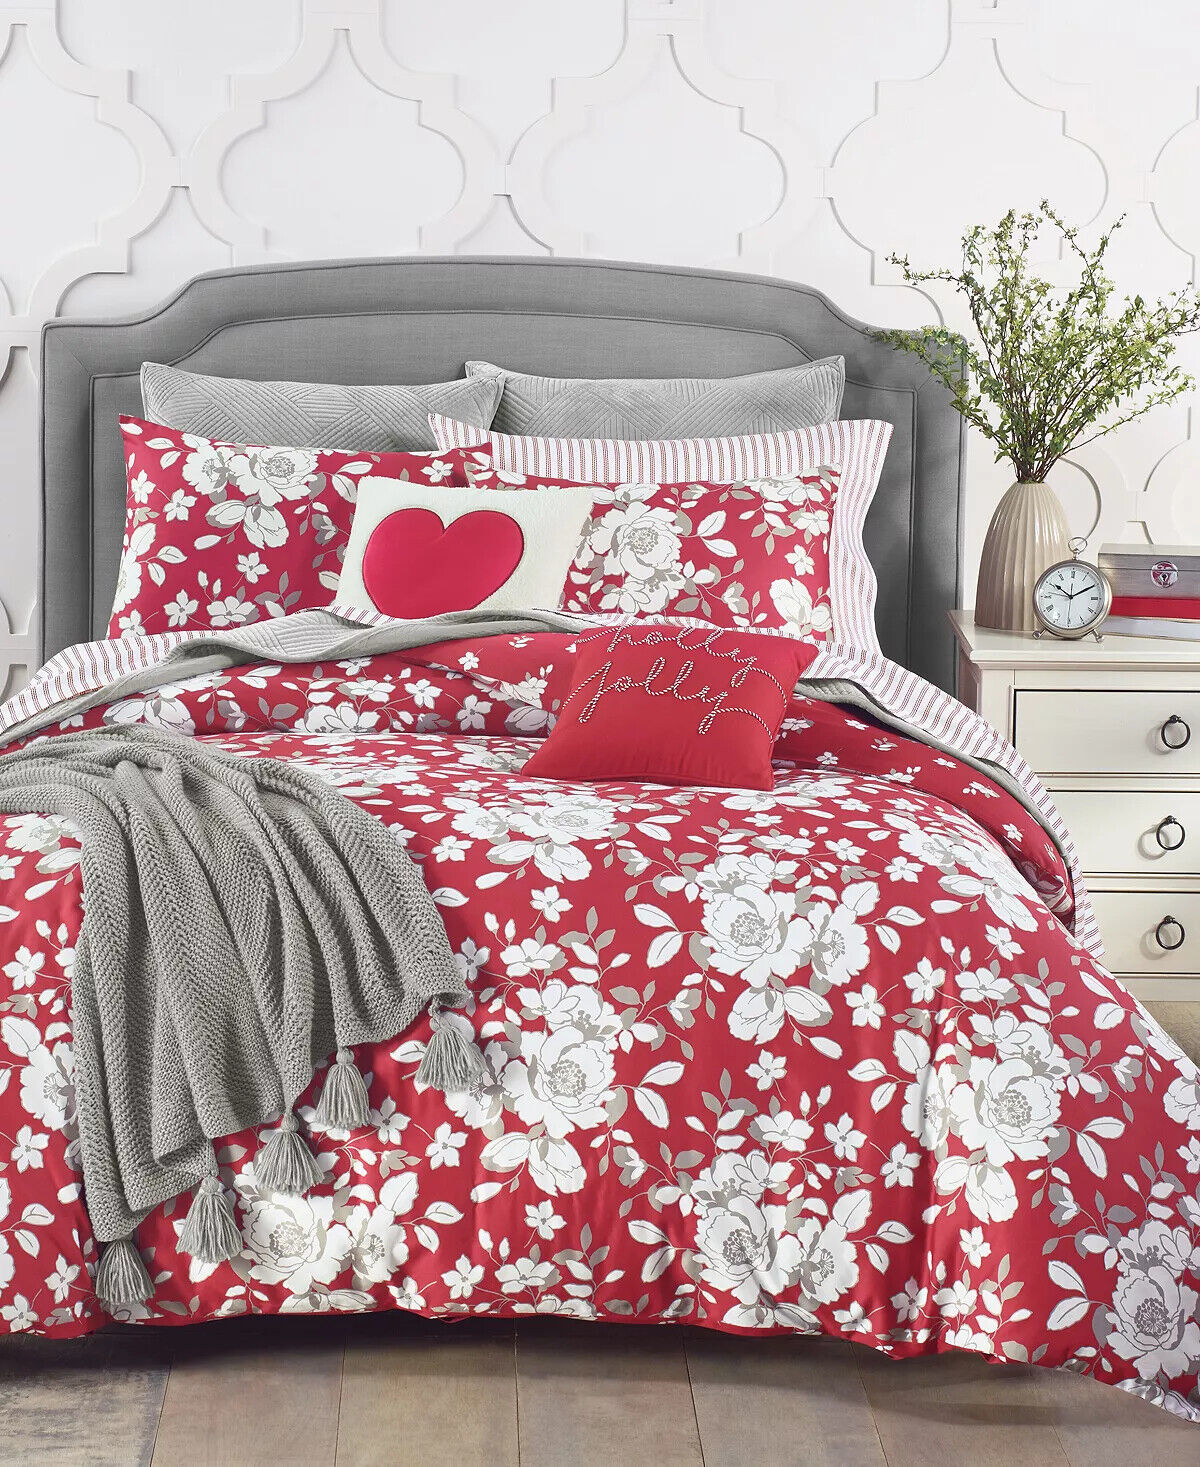 Charter Club Damask Designs Winter Rose Duvet Cover Set, Twin or Full/Queen - $189.99 - $229.99